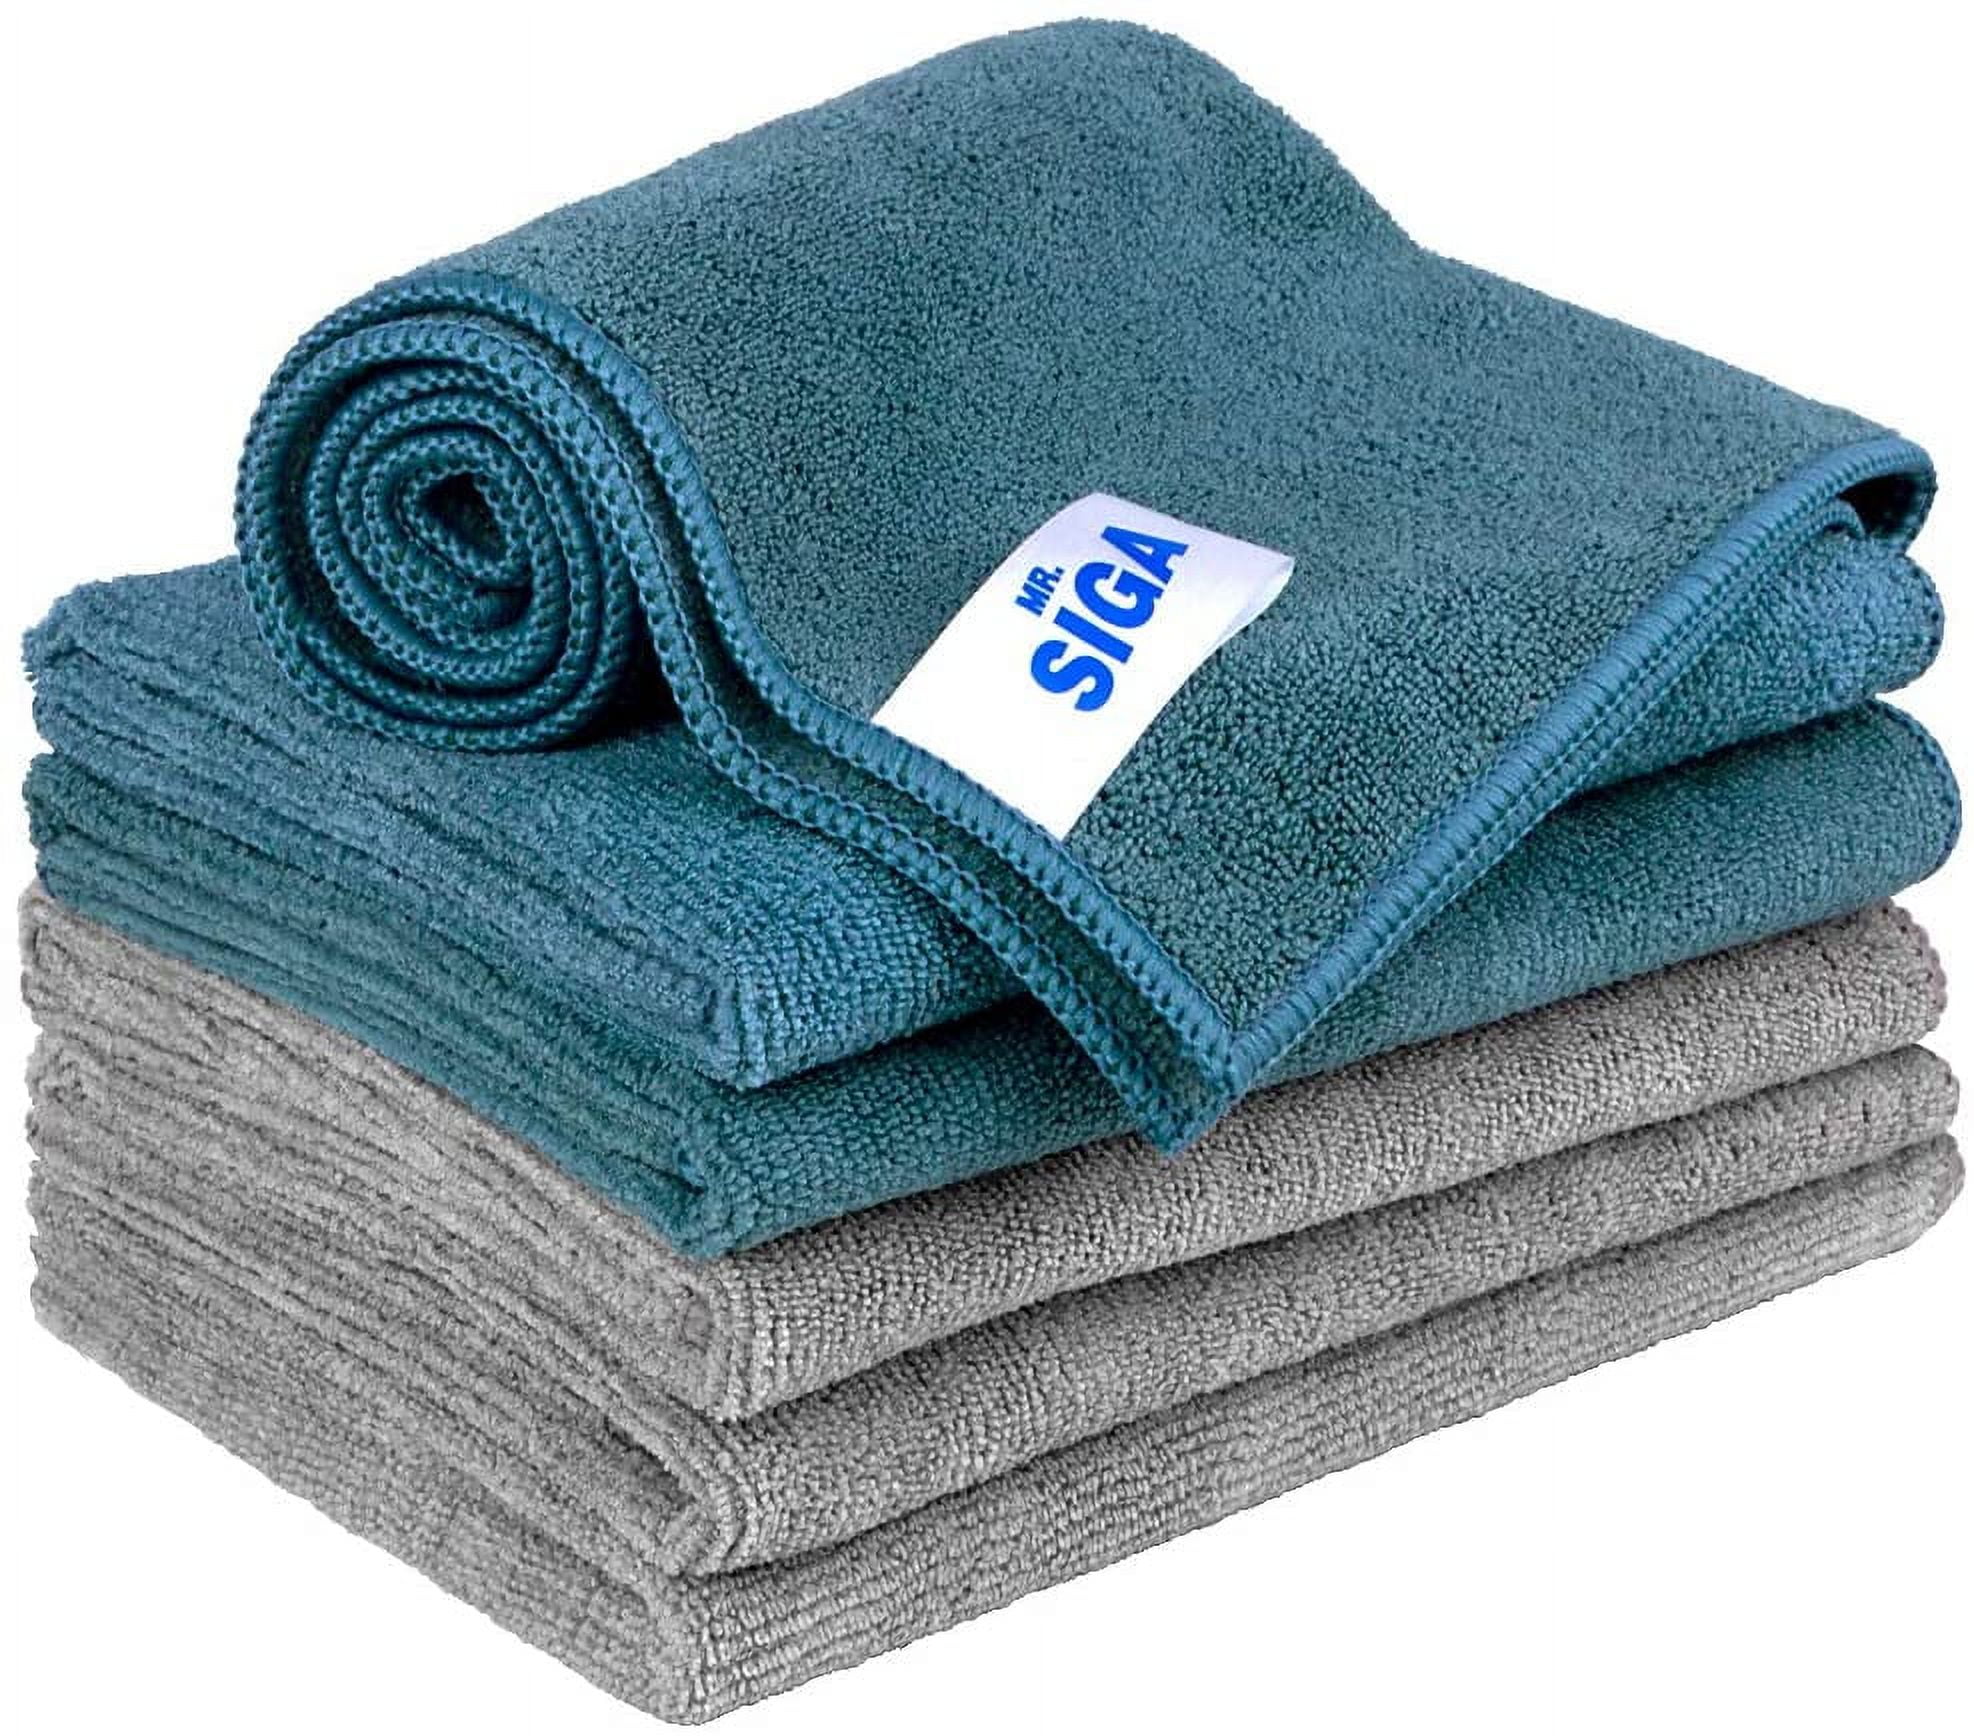 MR.SIGA Microfiber Cleaning Cloth, All-Purpose Microfiber Towels, Streak  Free Cleaning Rags, Pack of 12, Grey, Size 32 x 32 cm(12.6 x 12.6 inch)